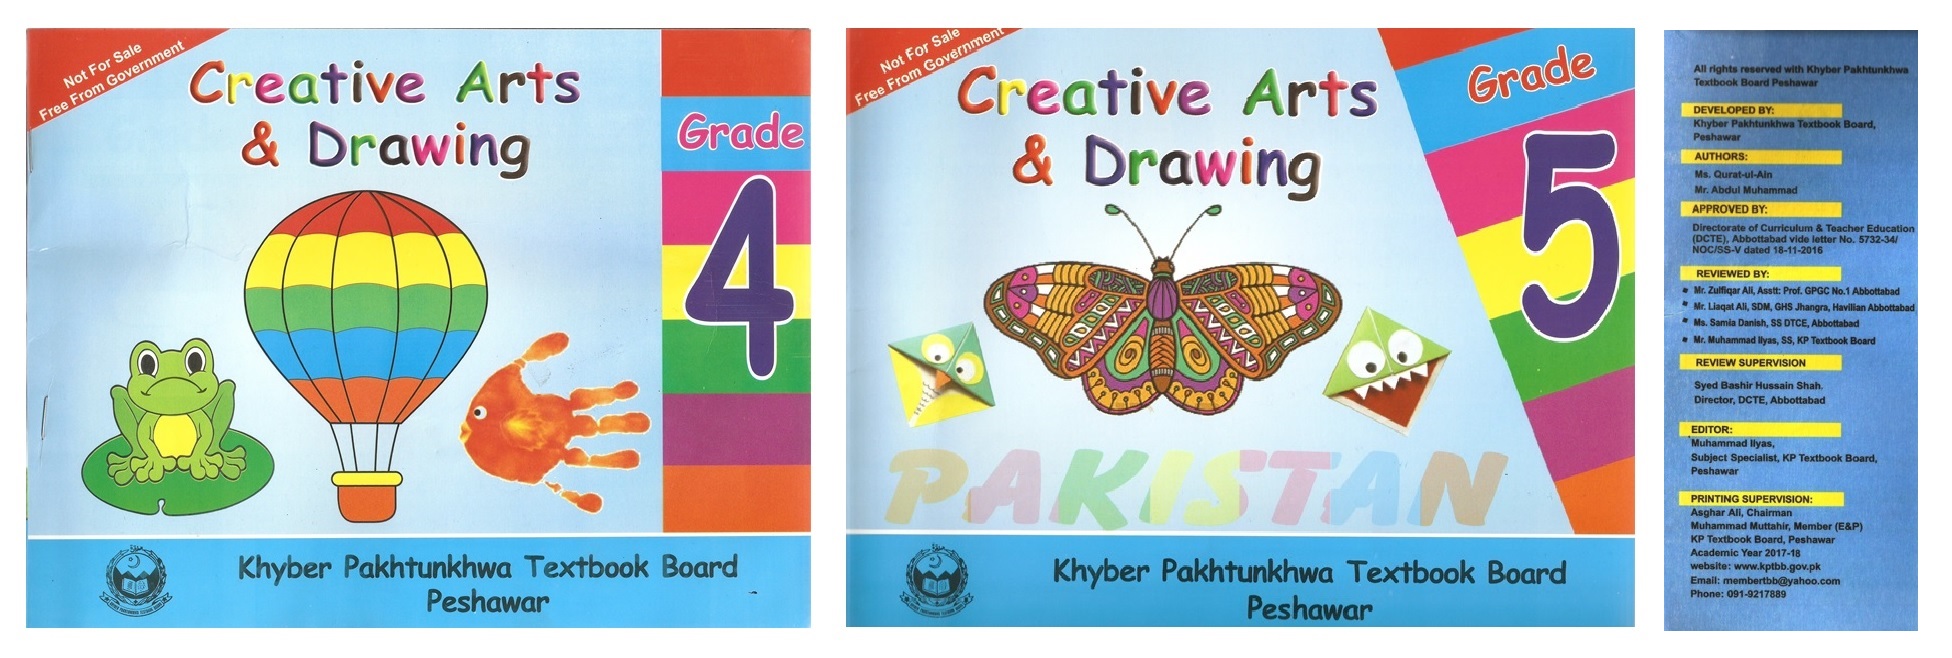 KP Textbook Board published Drawing Books (Grades 4 & 5) designed by Ms. Qurat-ul-Ain, Lecturer, Department of Art & Design